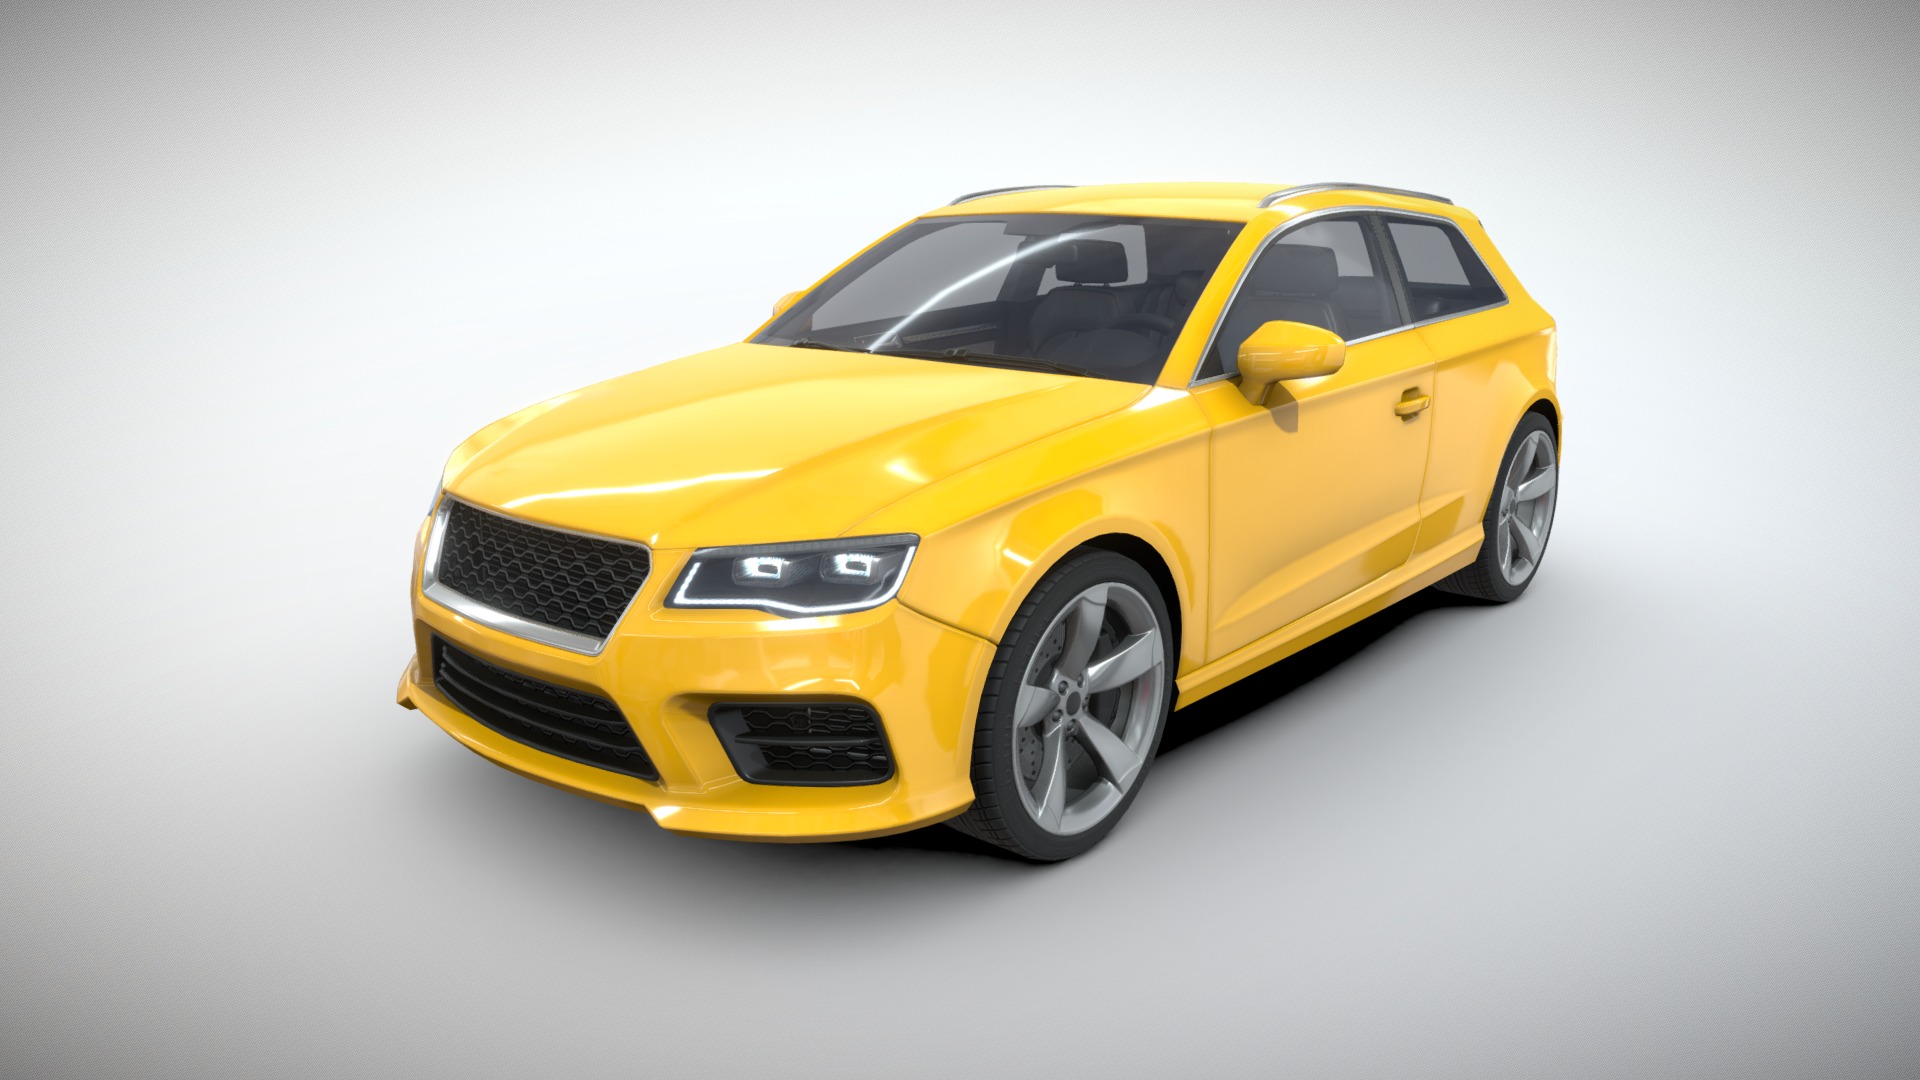 3D model Realistic Car HD 03 - This is a 3D model of the Realistic Car HD 03. The 3D model is about a yellow car with a white background.